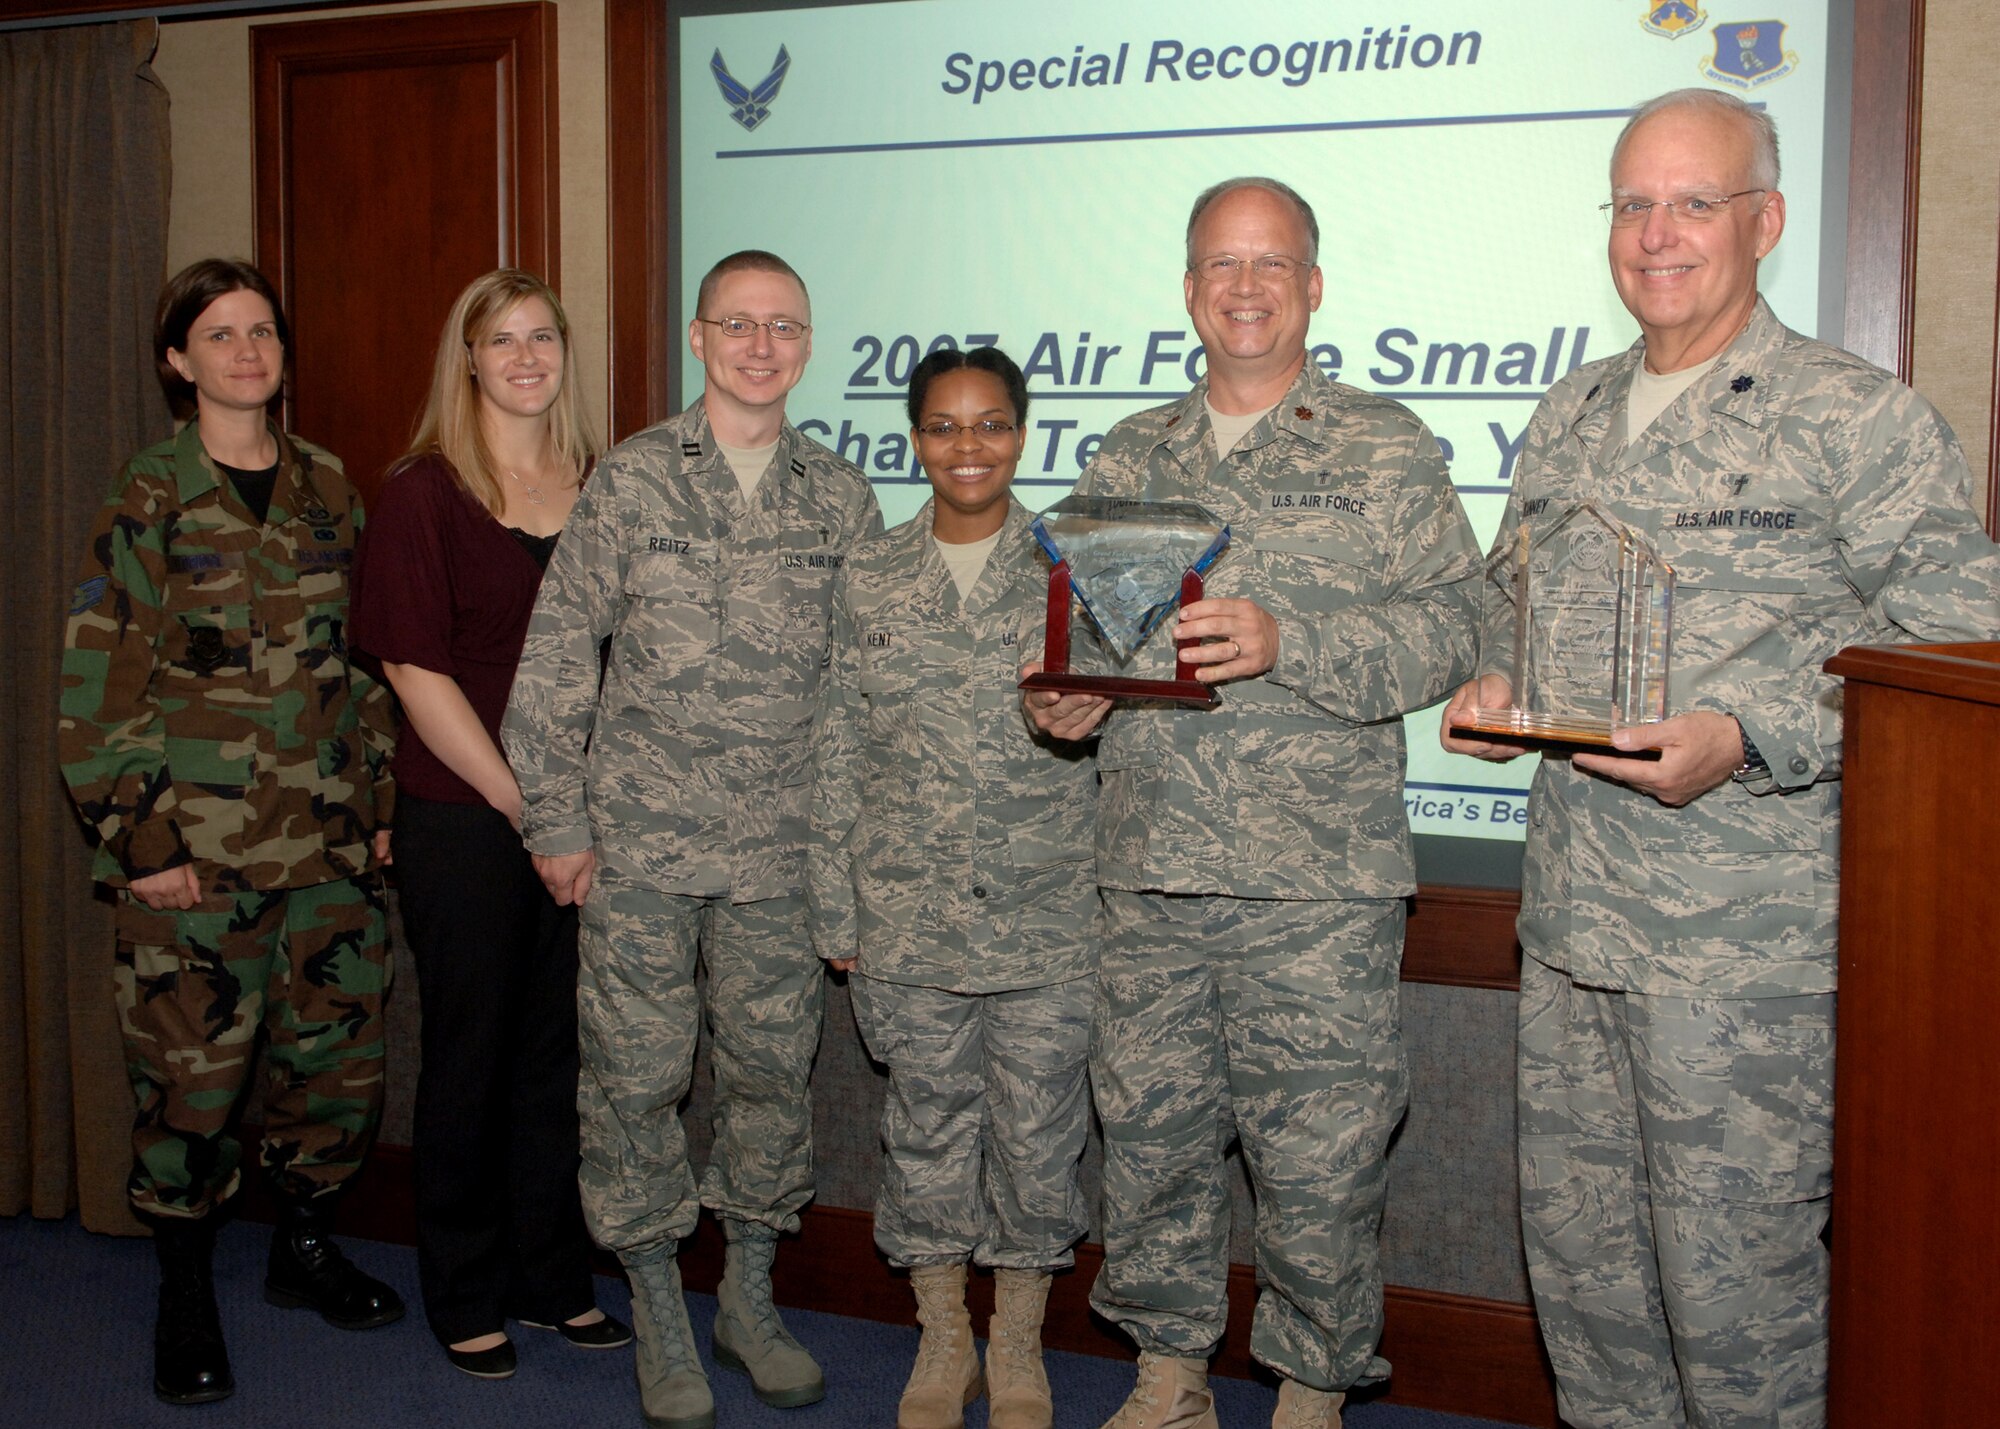 Base Chapel staff was recognized recently as the 2007 Air Force small chapel team of the year. From left to right, Staff Sgt. Sara Eldridge, Ms. Janelle Holland, Chaplain (Capt.) Roland Reitz, Tech. Sgt. Shanda Kent, Chaplain (Maj.) Kevin Lockett and Wing Chaplain (Lt. Col.) John Kinney. (U.S. Air Force photo/Senior Airman Tiffany Colburn)